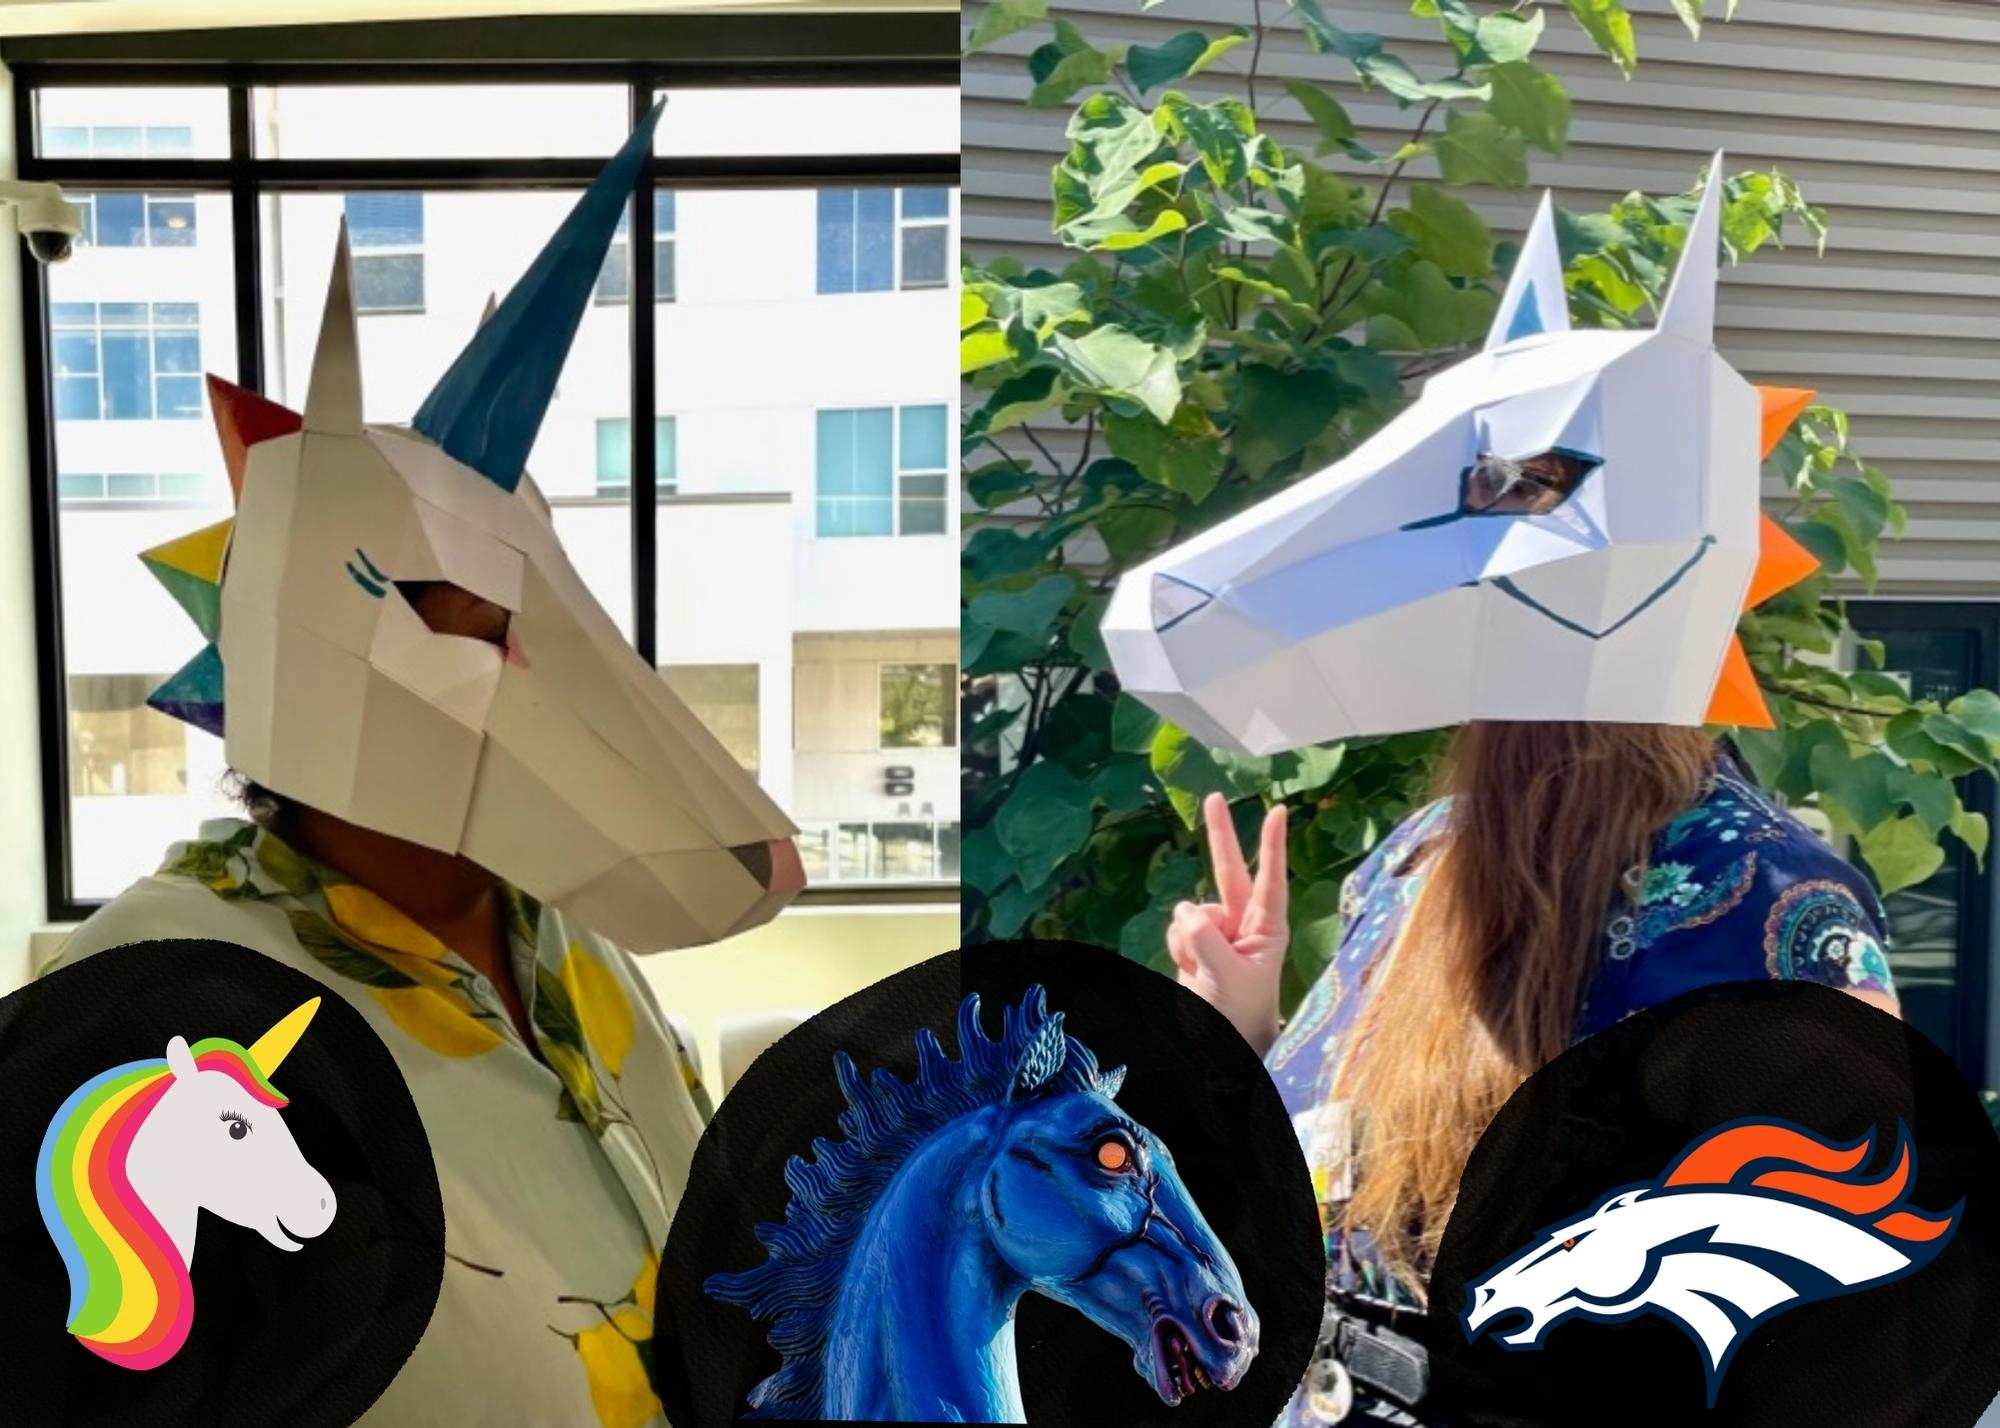 two people wearing paper horse masks, with a cartoon unicorn, bronco logo, and image of blue horse